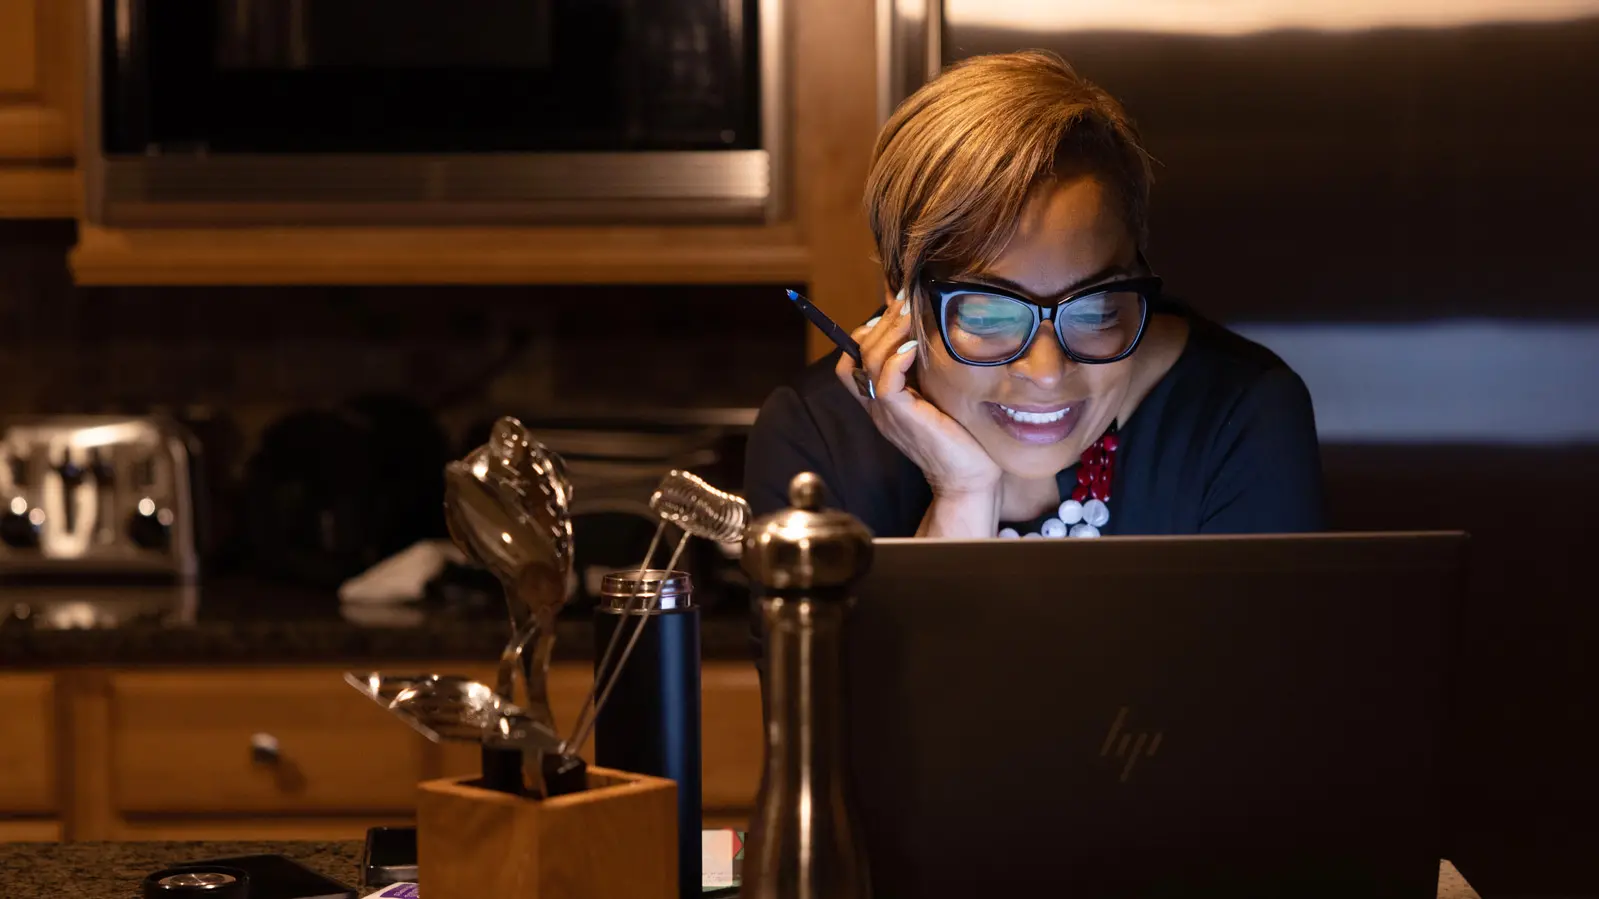 In a dimly lit kitchen, a Black woman with a stylish haircut leans on her counter as she smiles at her laptop, which is showing a virtual meeting with colleagues. The light from the monitor lights up her face and reflects off her glasses.